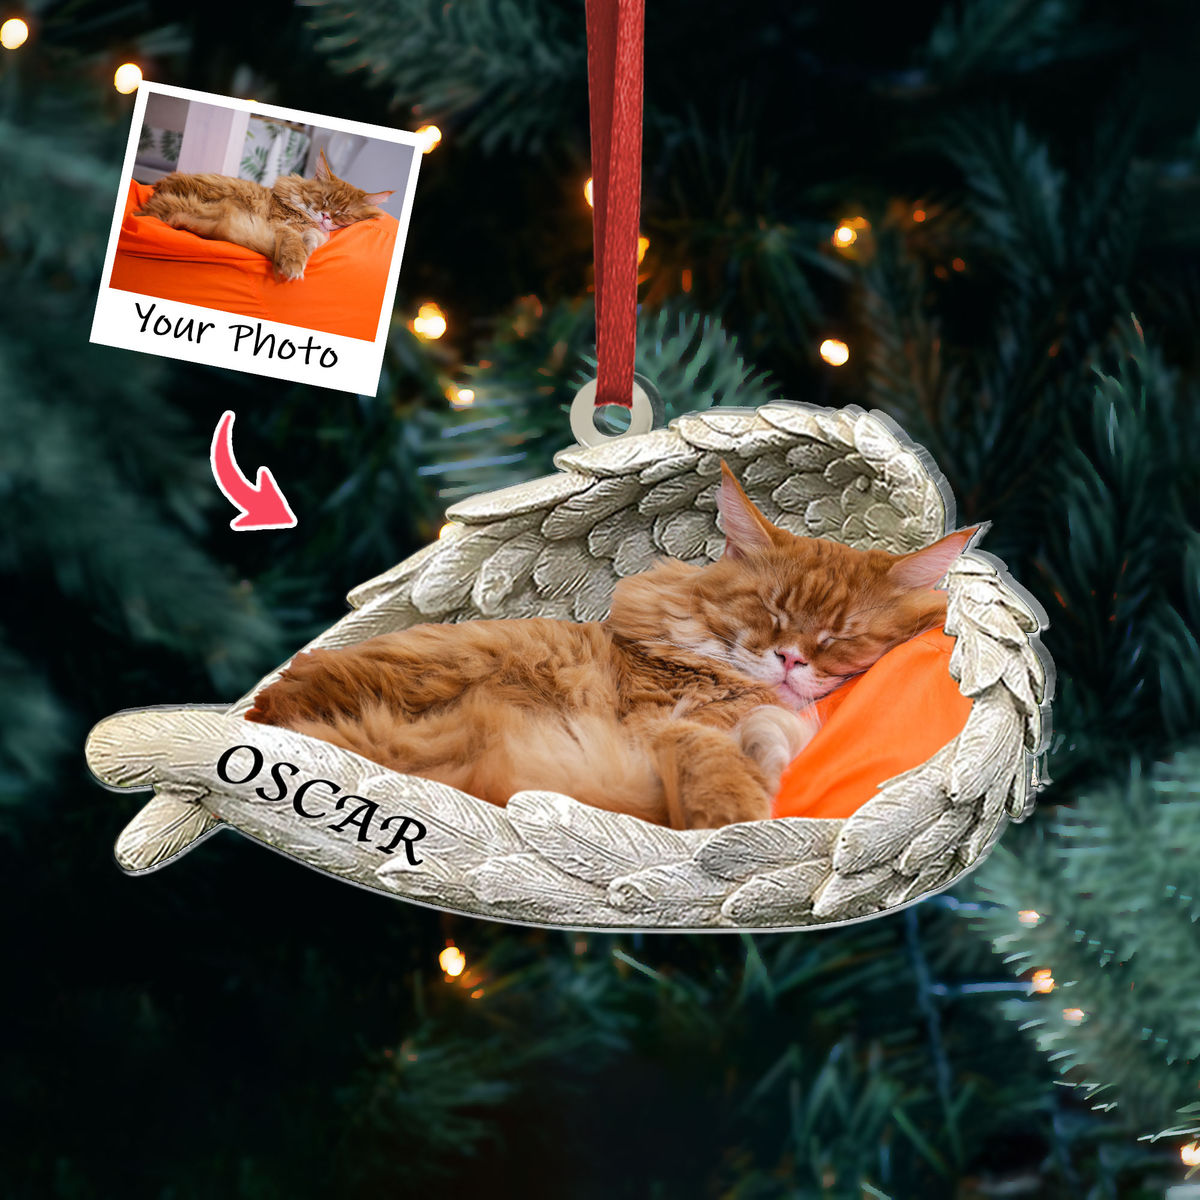 Cat Acrylic Ornament - Customized Your Photo Ornament - Sleeping Pet Within Angel Wings - Custom Ornament from Photo, Christmas Gifts_4